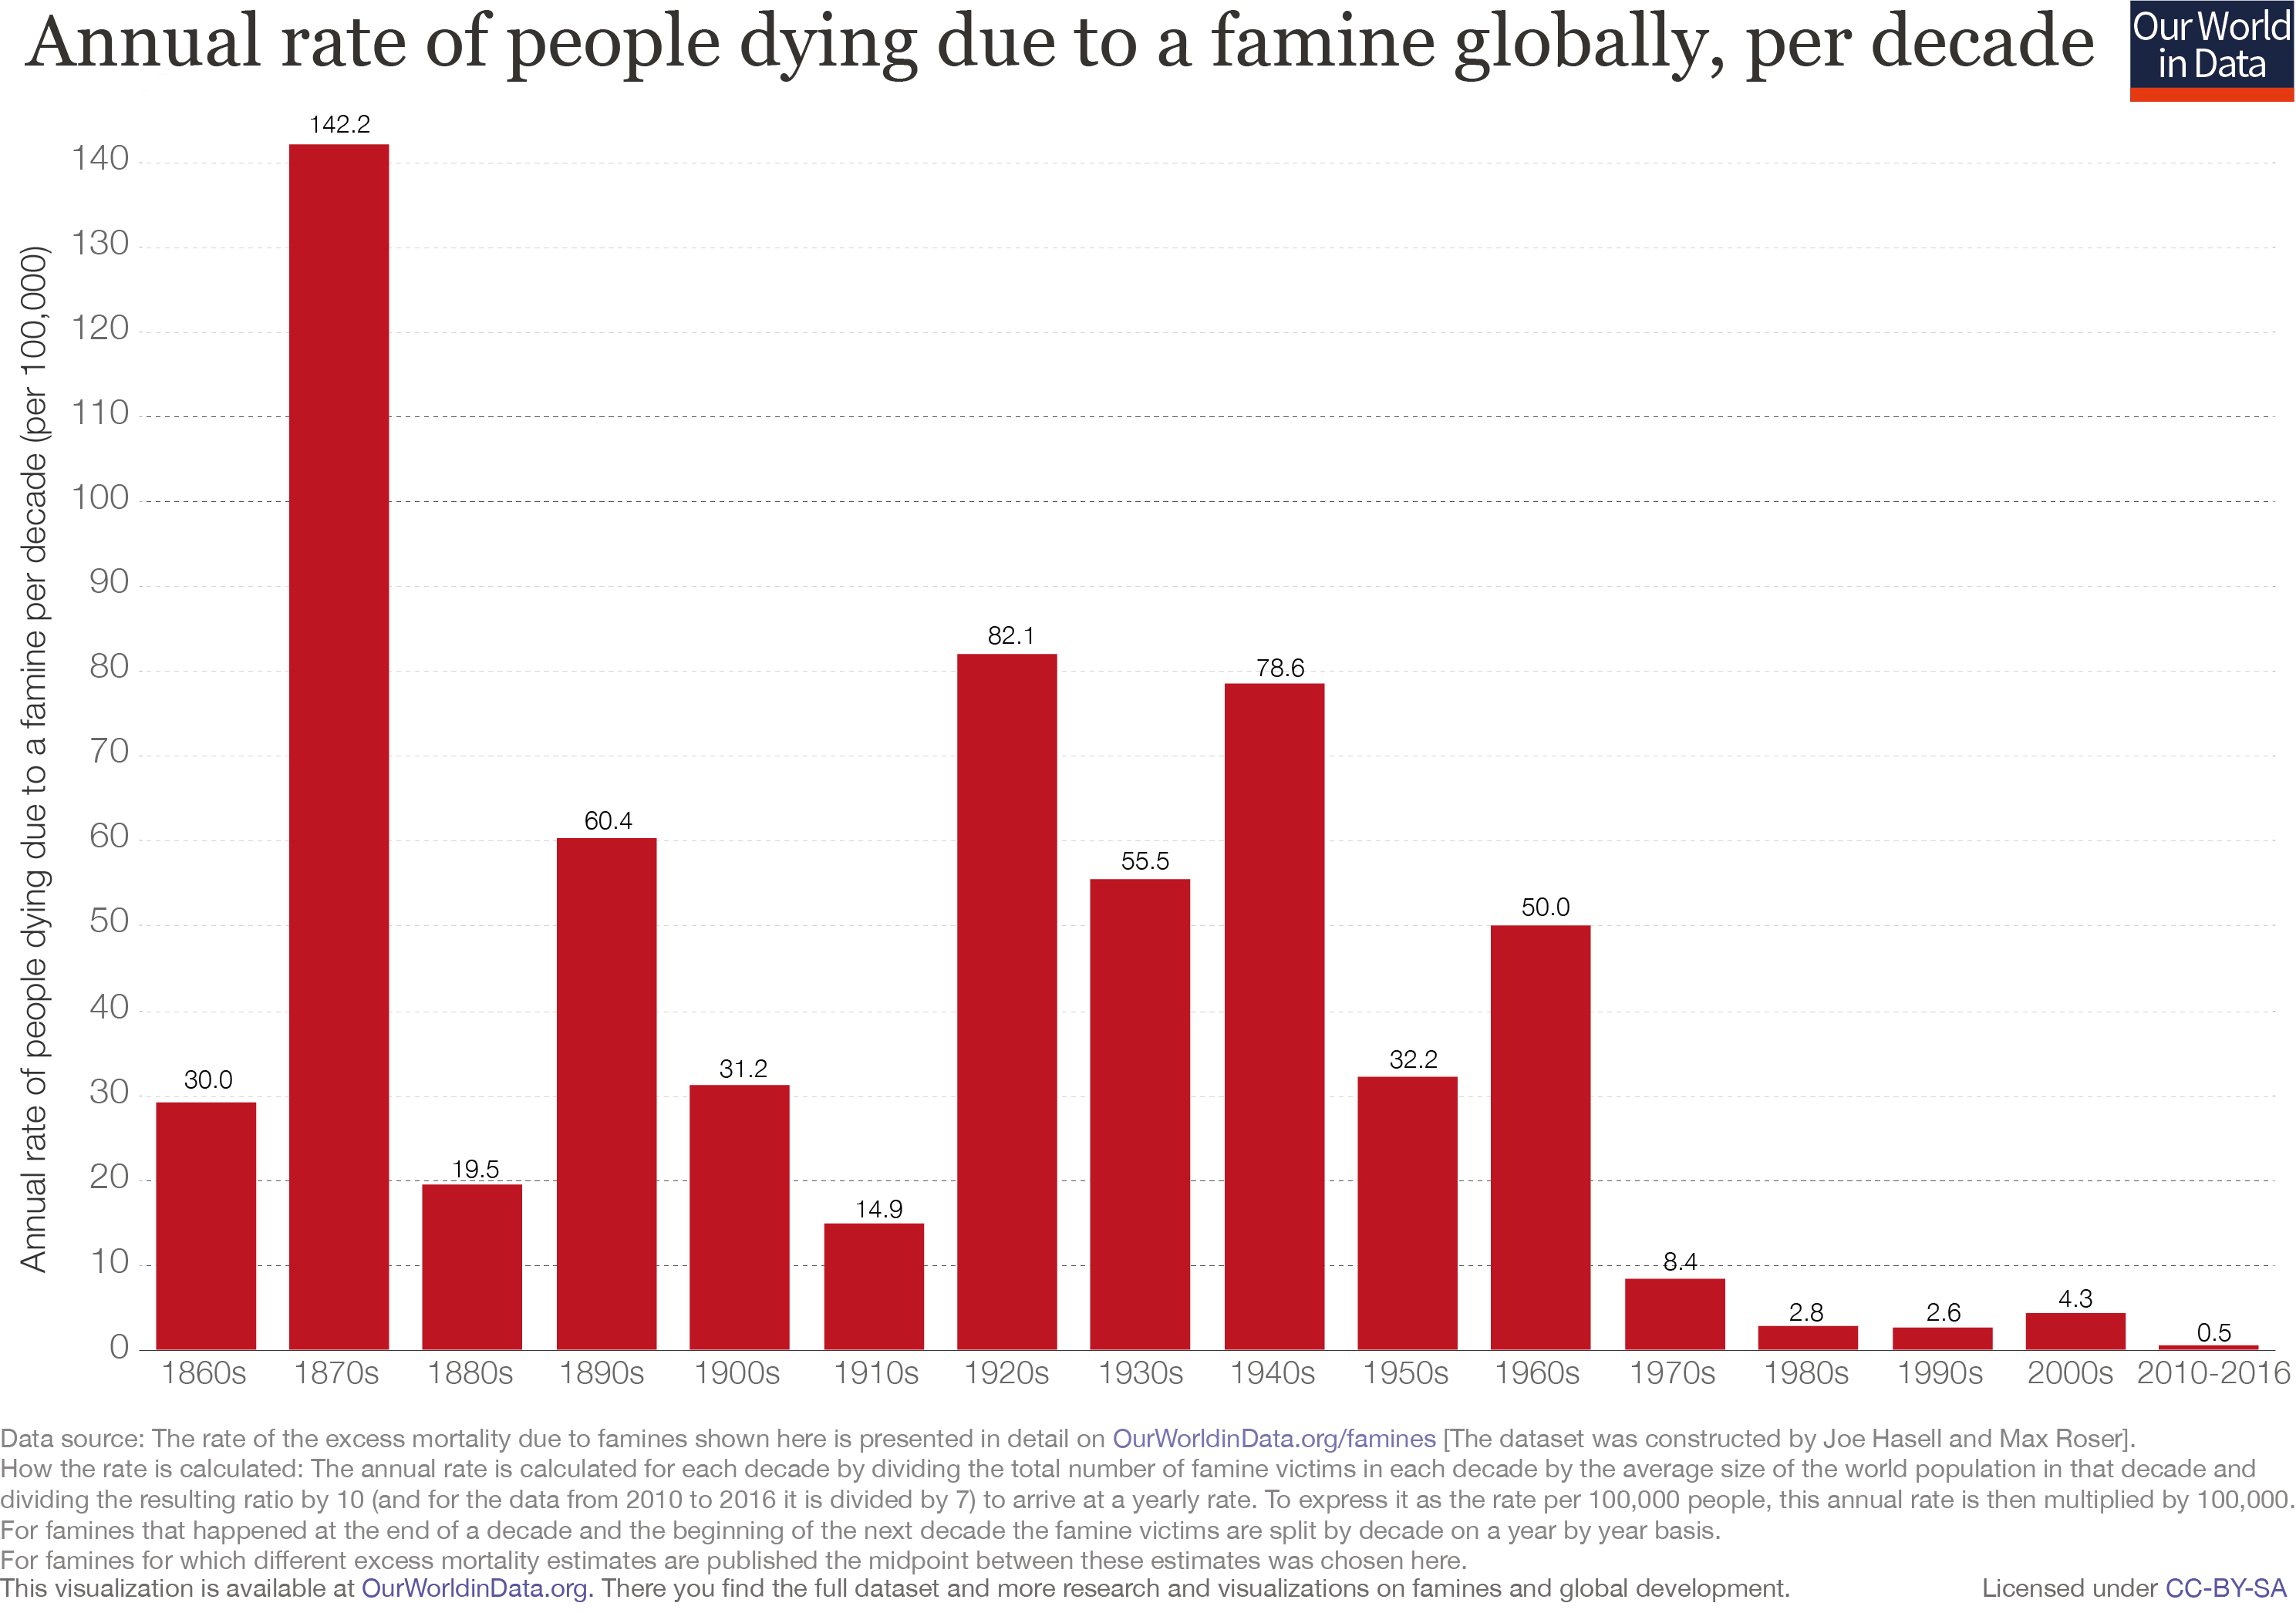 Famine death rate since 1860s revised